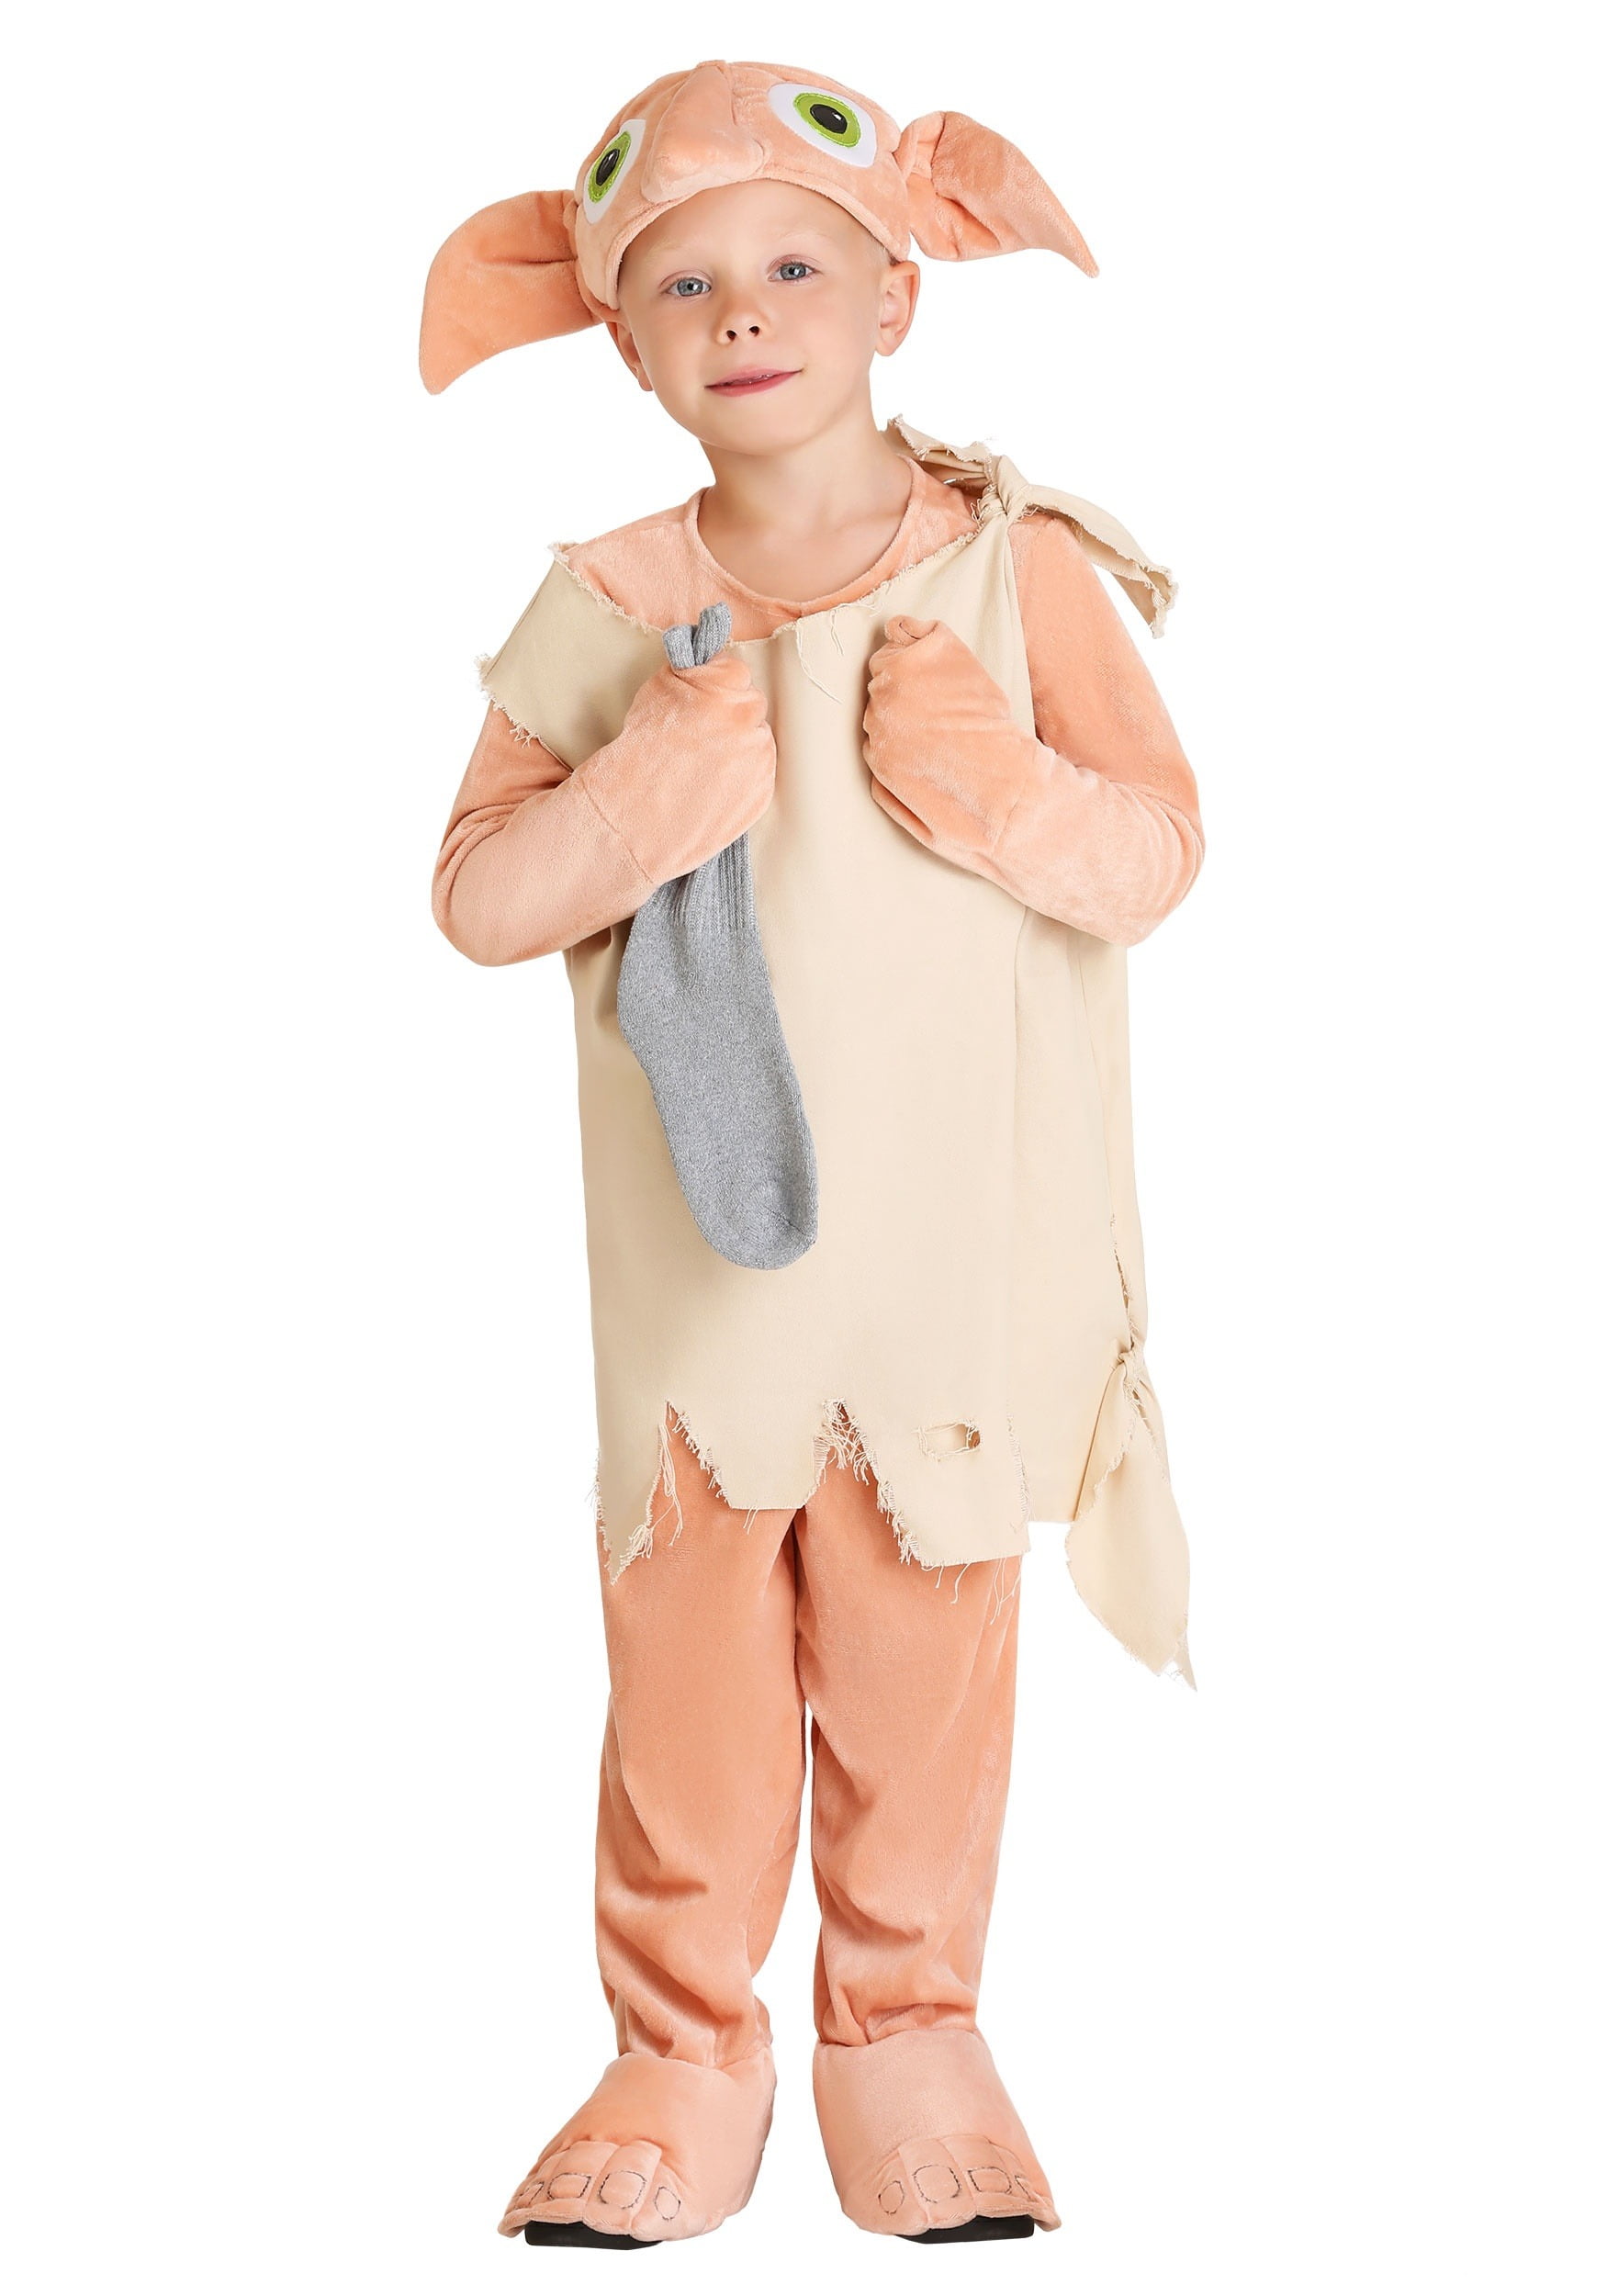 POD Go delivers good value. dobby elf costume The cord that came with it di...